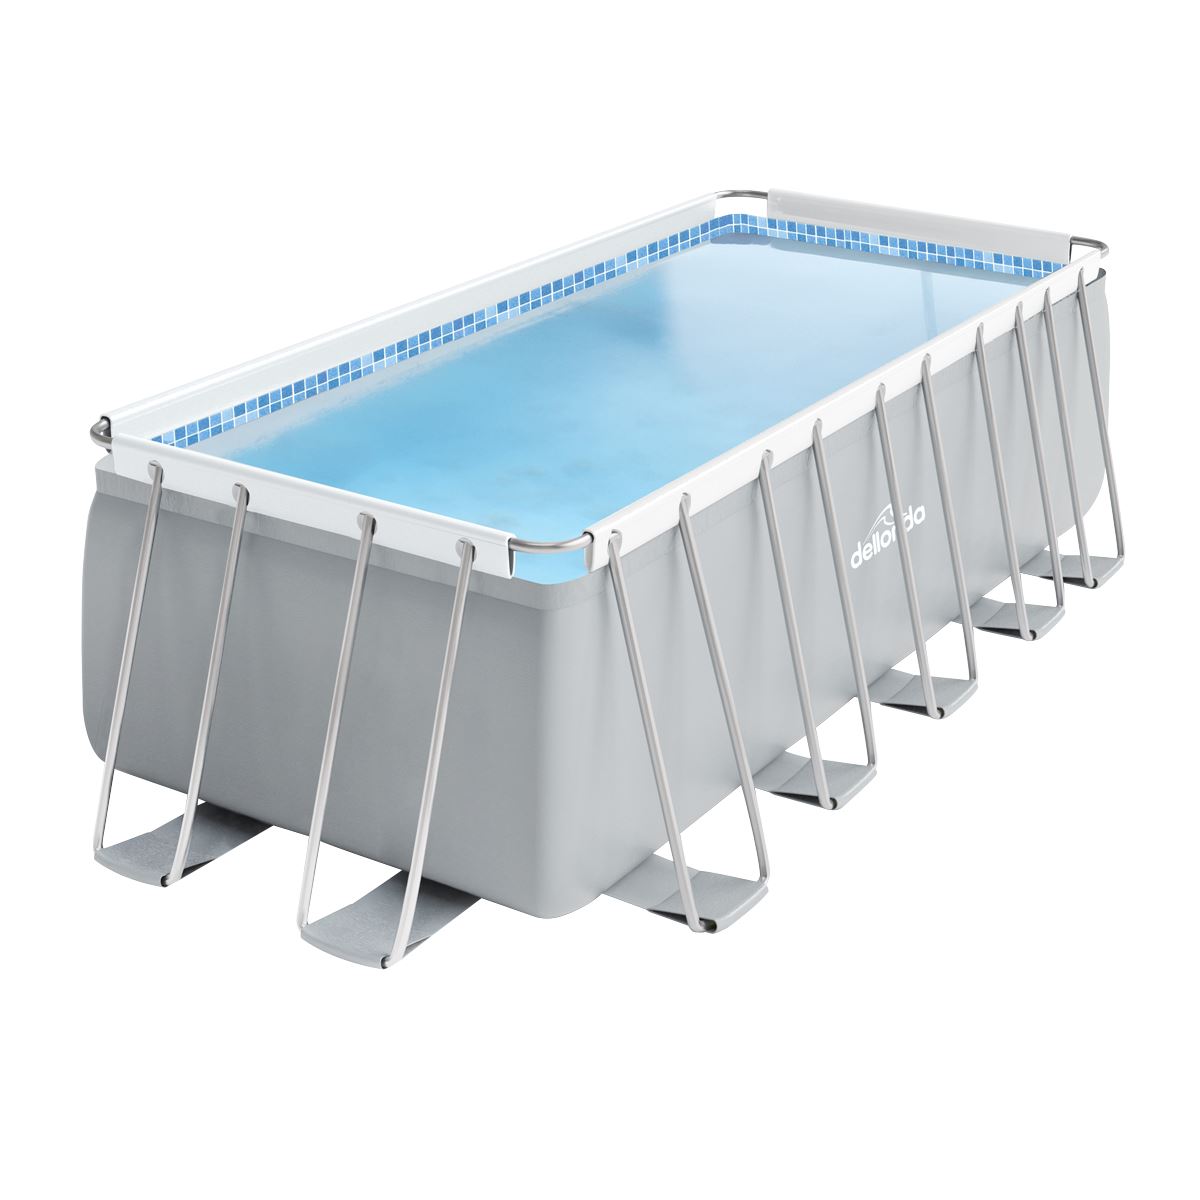 Dellonda 21ft Deluxe Steel Frame Swimming Pool, Rectangular with Step Ladder, Pool and Ground Covers and Filter Sand Pump